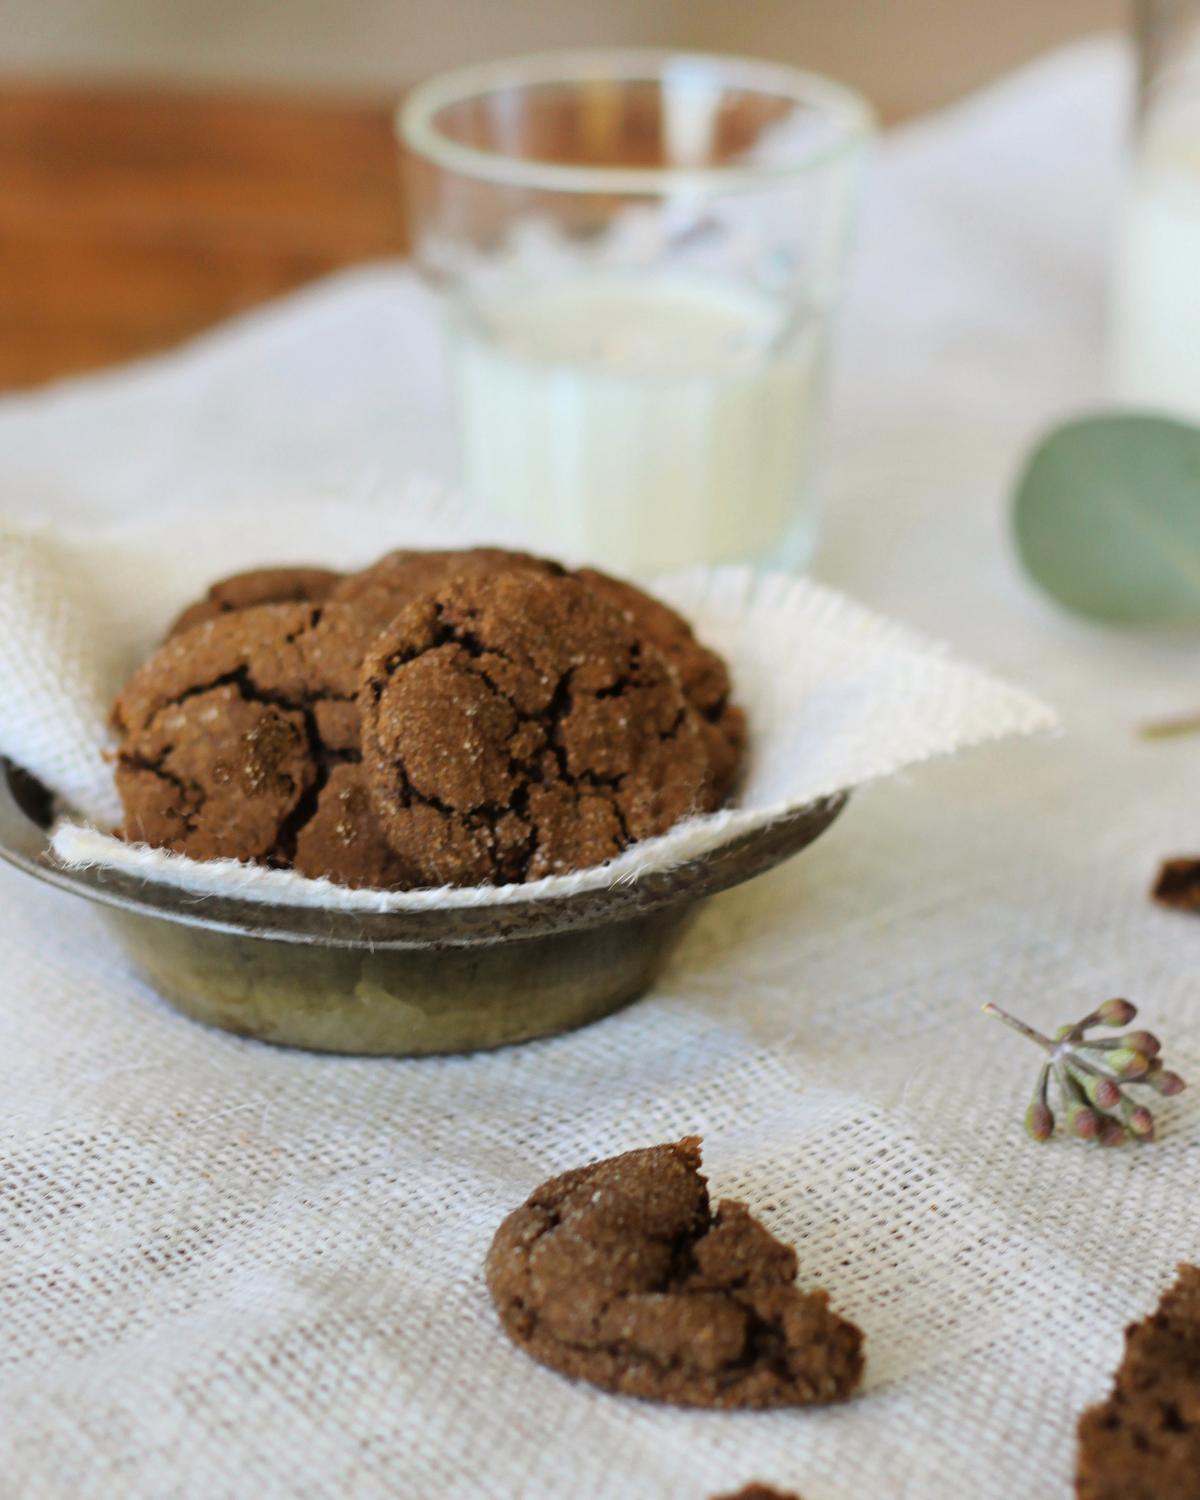 The ginger and spice in these Ginger Molasses Cookies go well with milk or glogg, spiced mulled wine. (Courtesy of Lynda Balslev for Tastefood)